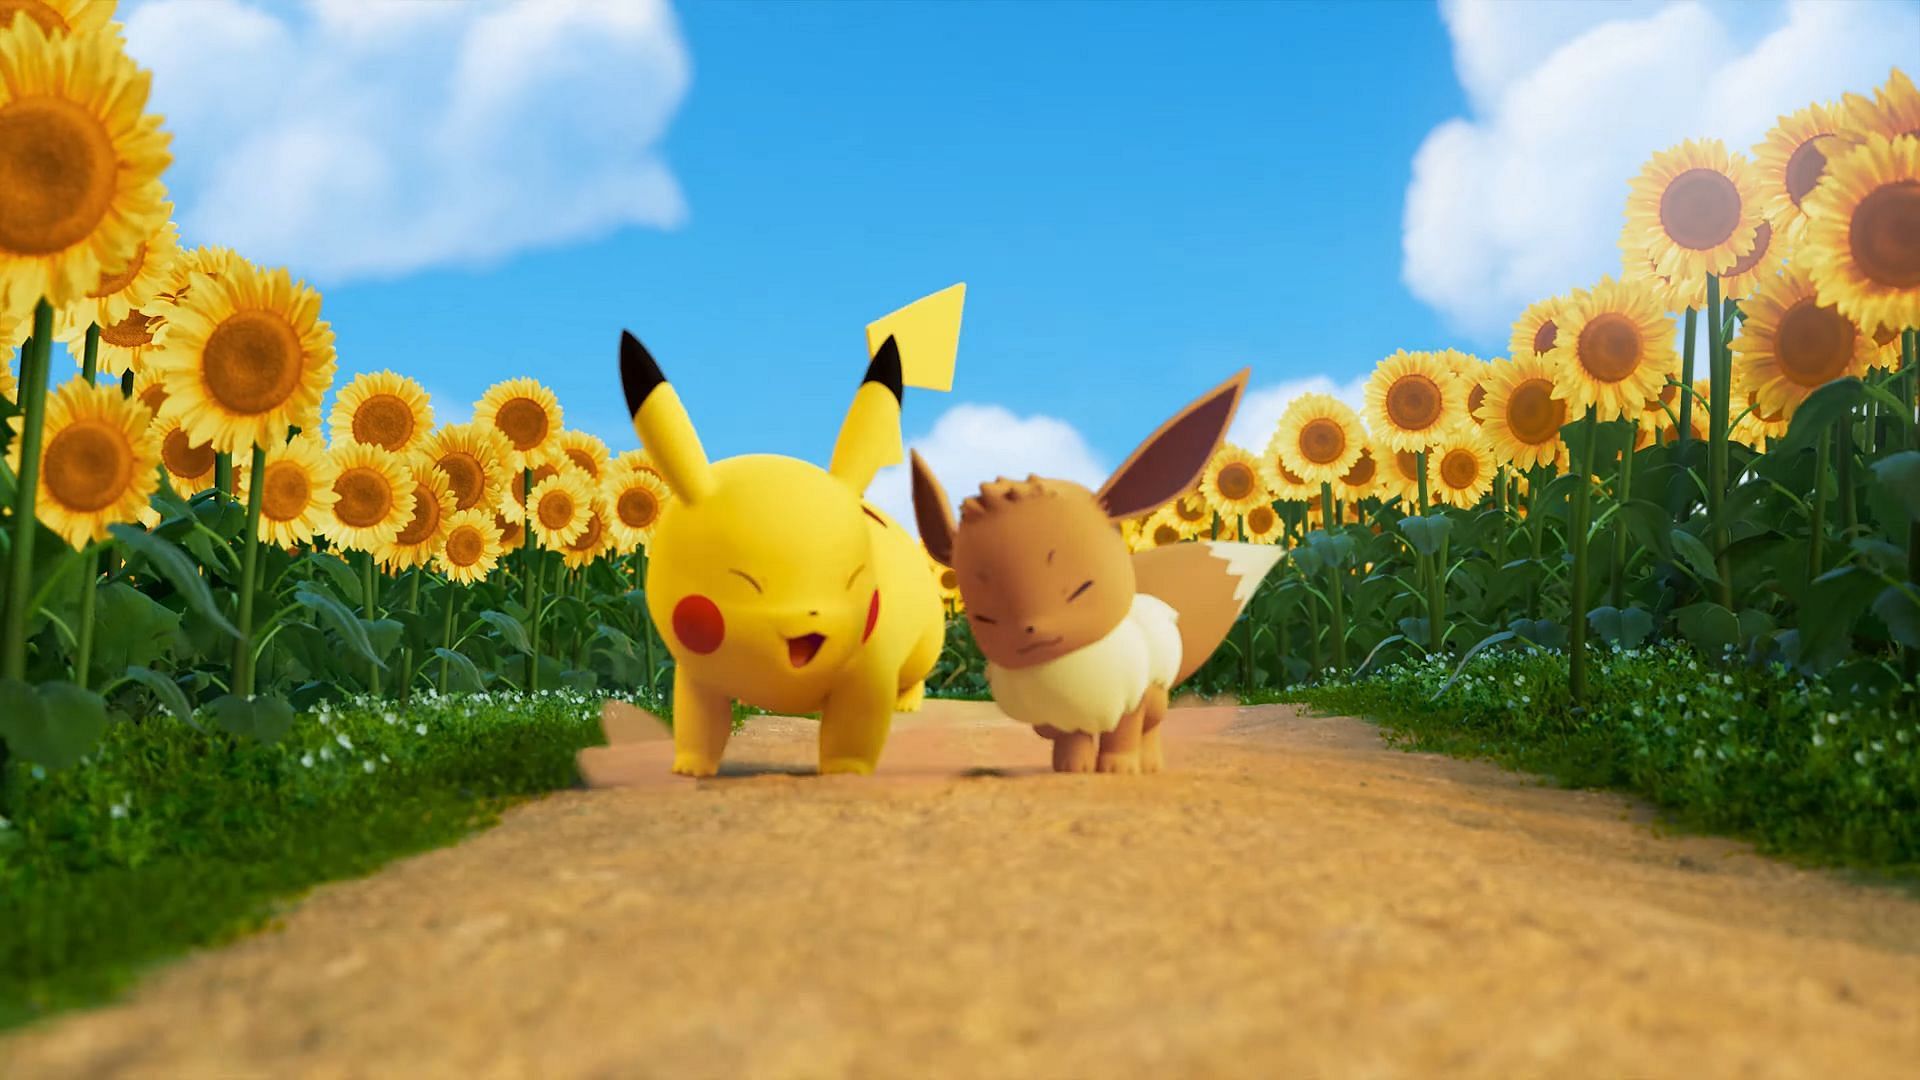 Pikachu and Eevee run through a field of sunflowers in a Pokemon X Van Gogh Museum promotional video.